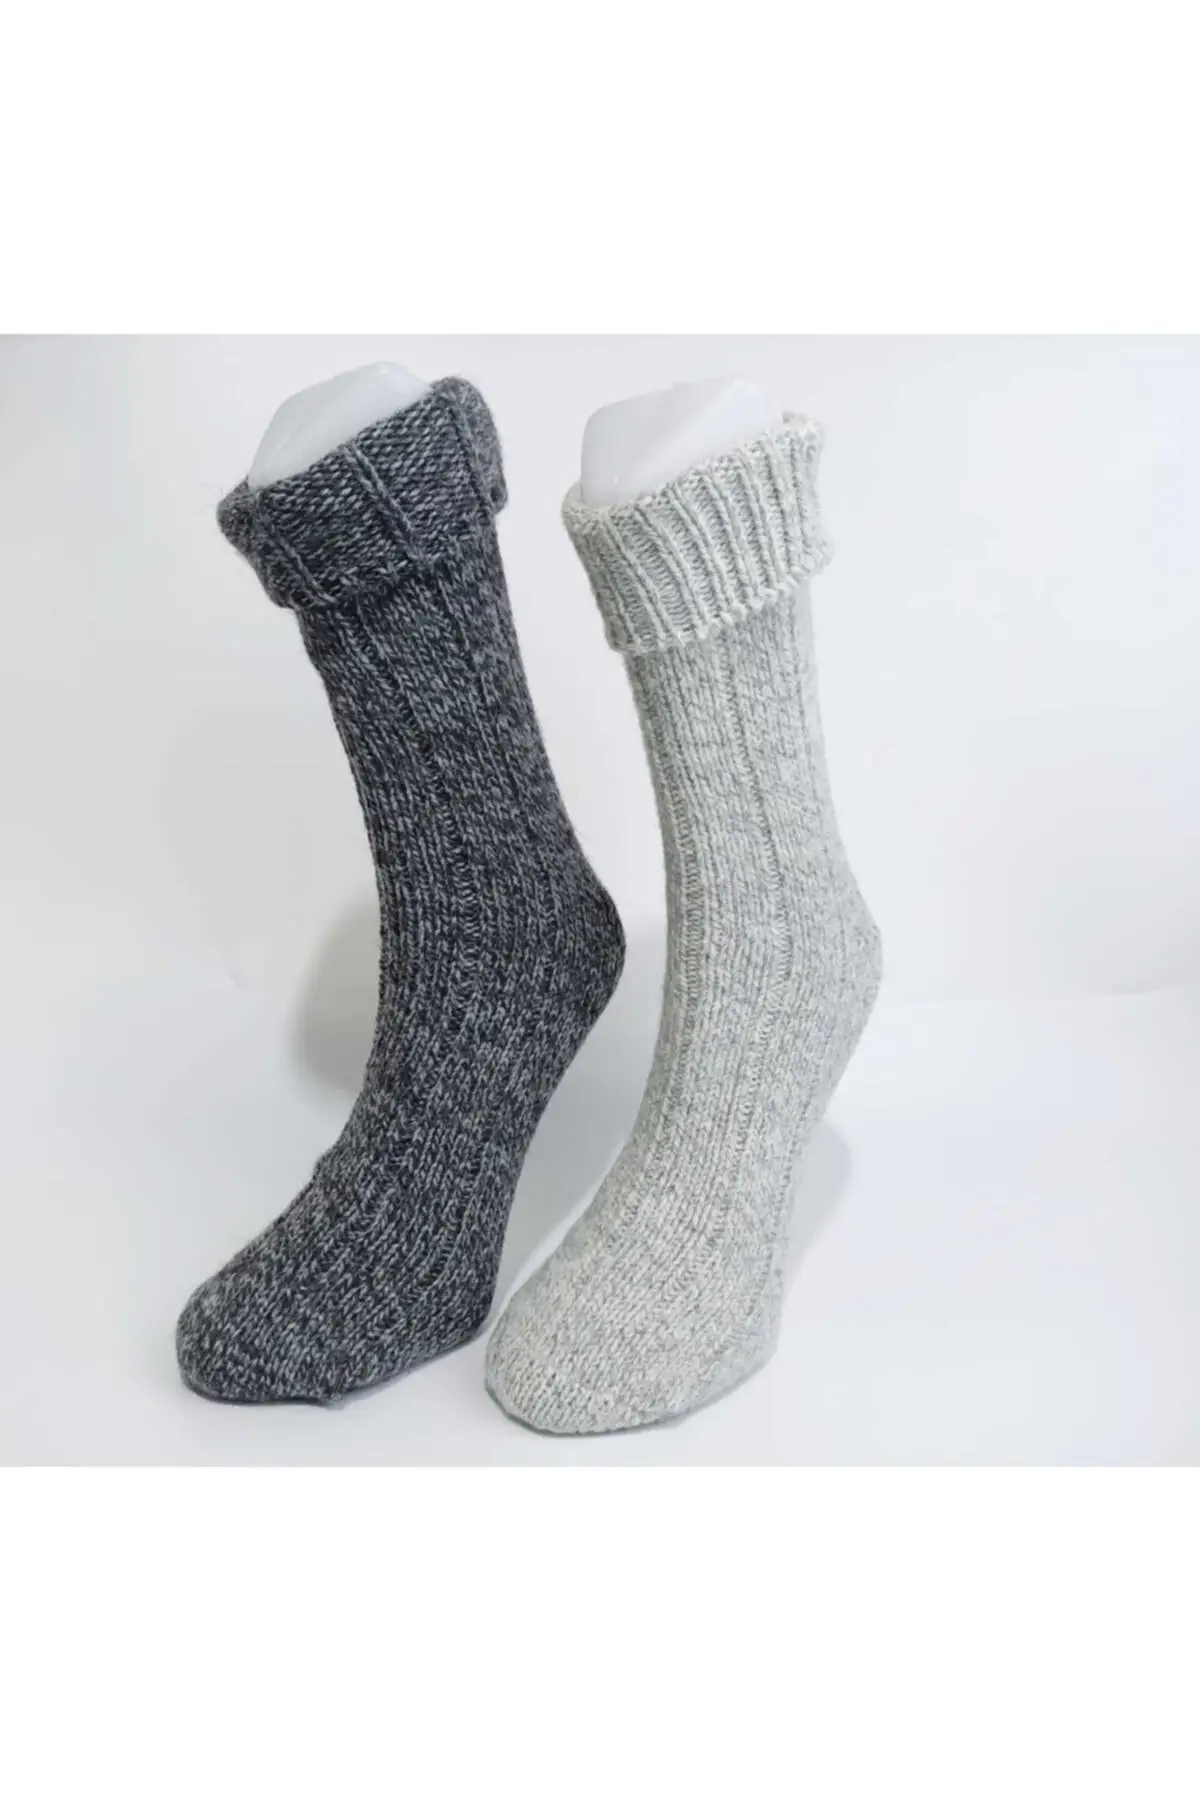 Men's Winter Wool Socks 2 Pieces Keep Warm Daily Use, Gray anf White , Winter Fashion, Free Shipping,